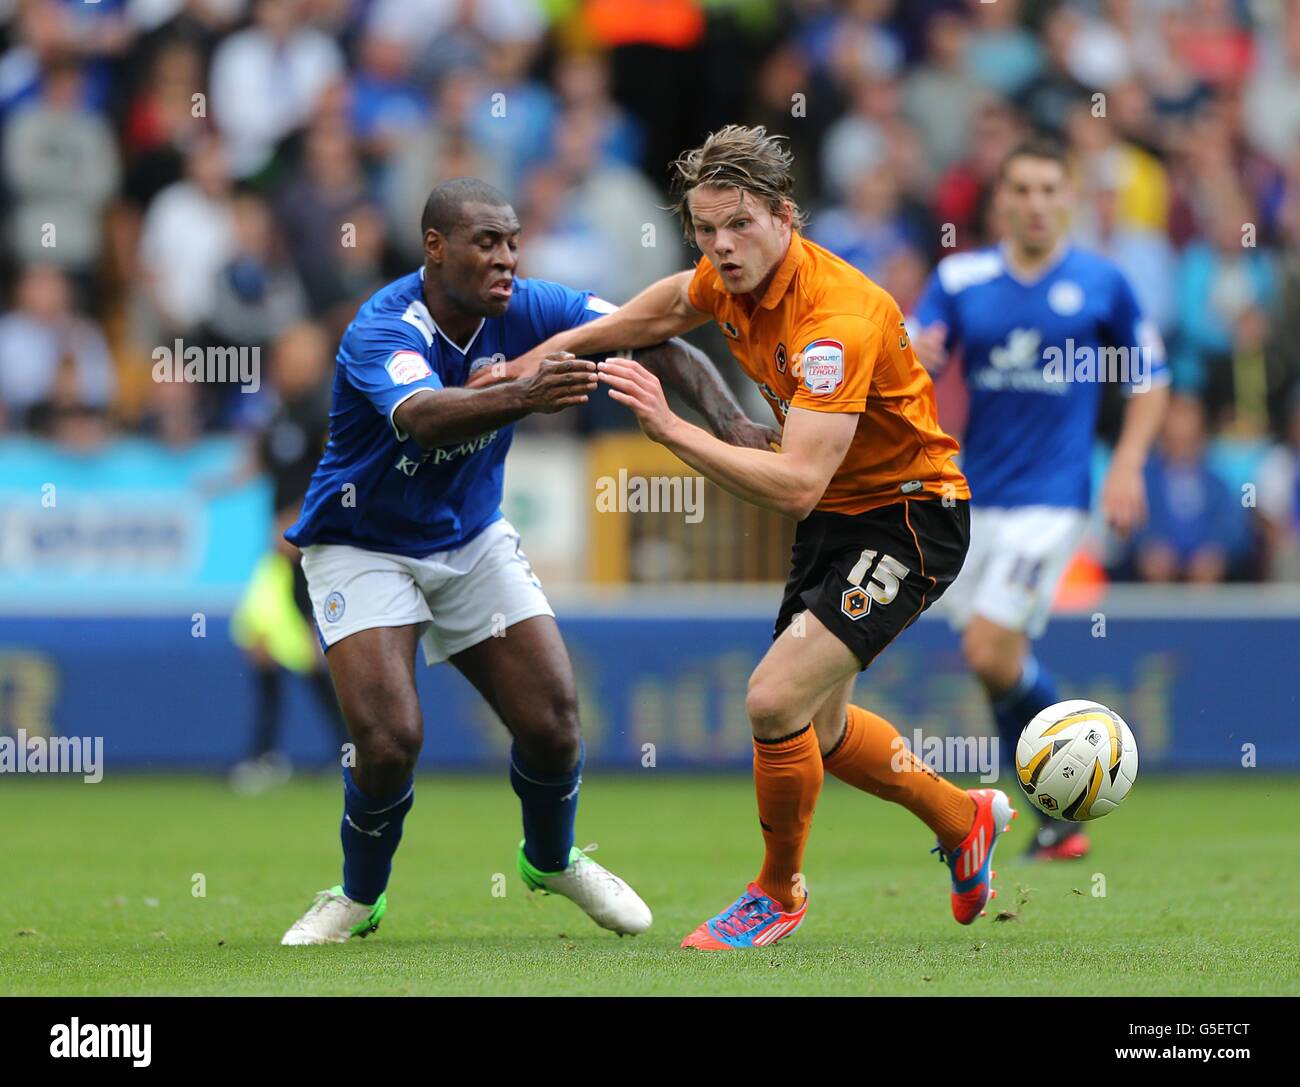 Soccer - npower Football League Championship - Wolverhampton Wanderers v Leicester City - Molineux. Leicester City's Wes Morgan (left) and Wolverhampton Wanderers' Bjorn Sigurdarson (right) battle for the ball Stock Photo